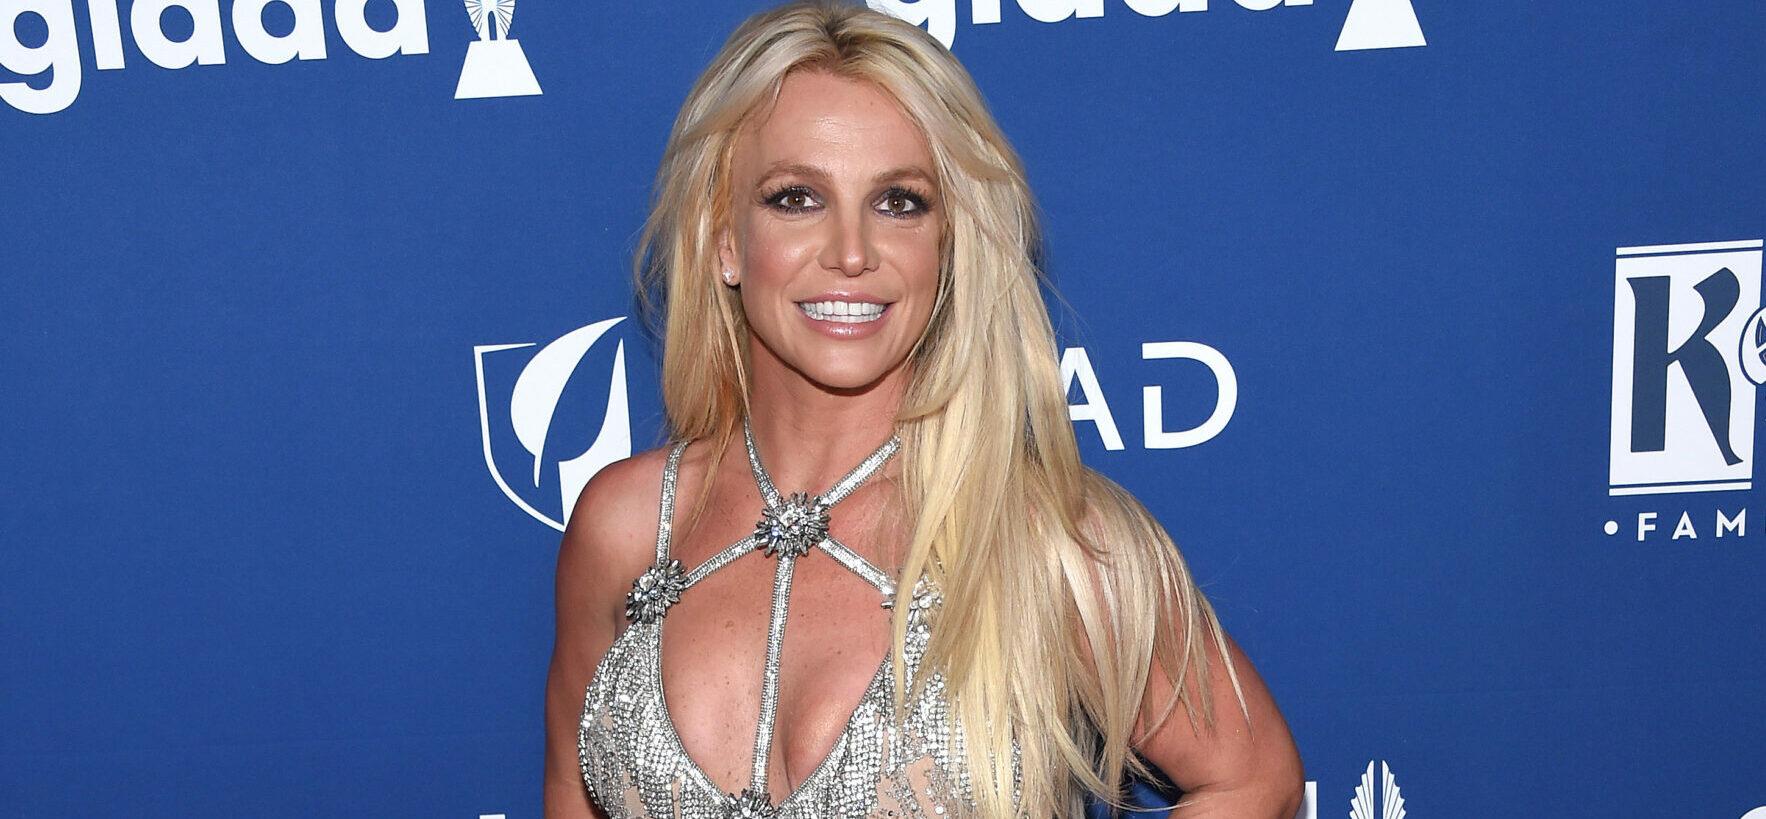 Britney Spears Bares Her Booty In Unclothed Beach Snap